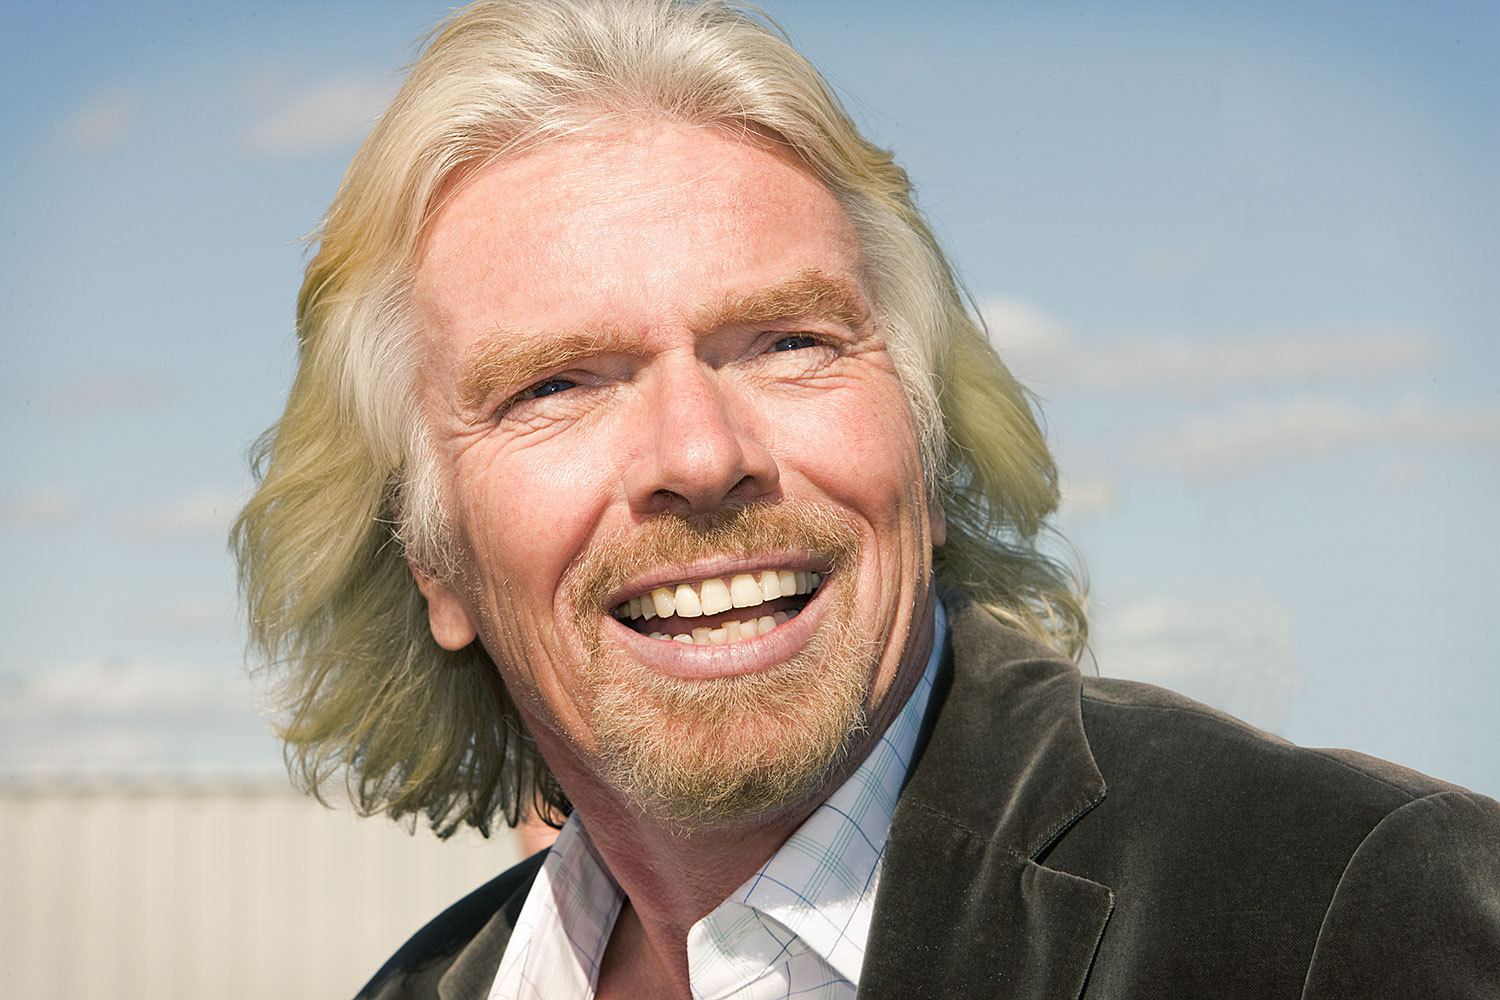 How Does Richard Branson Overcome His Weaknesses?